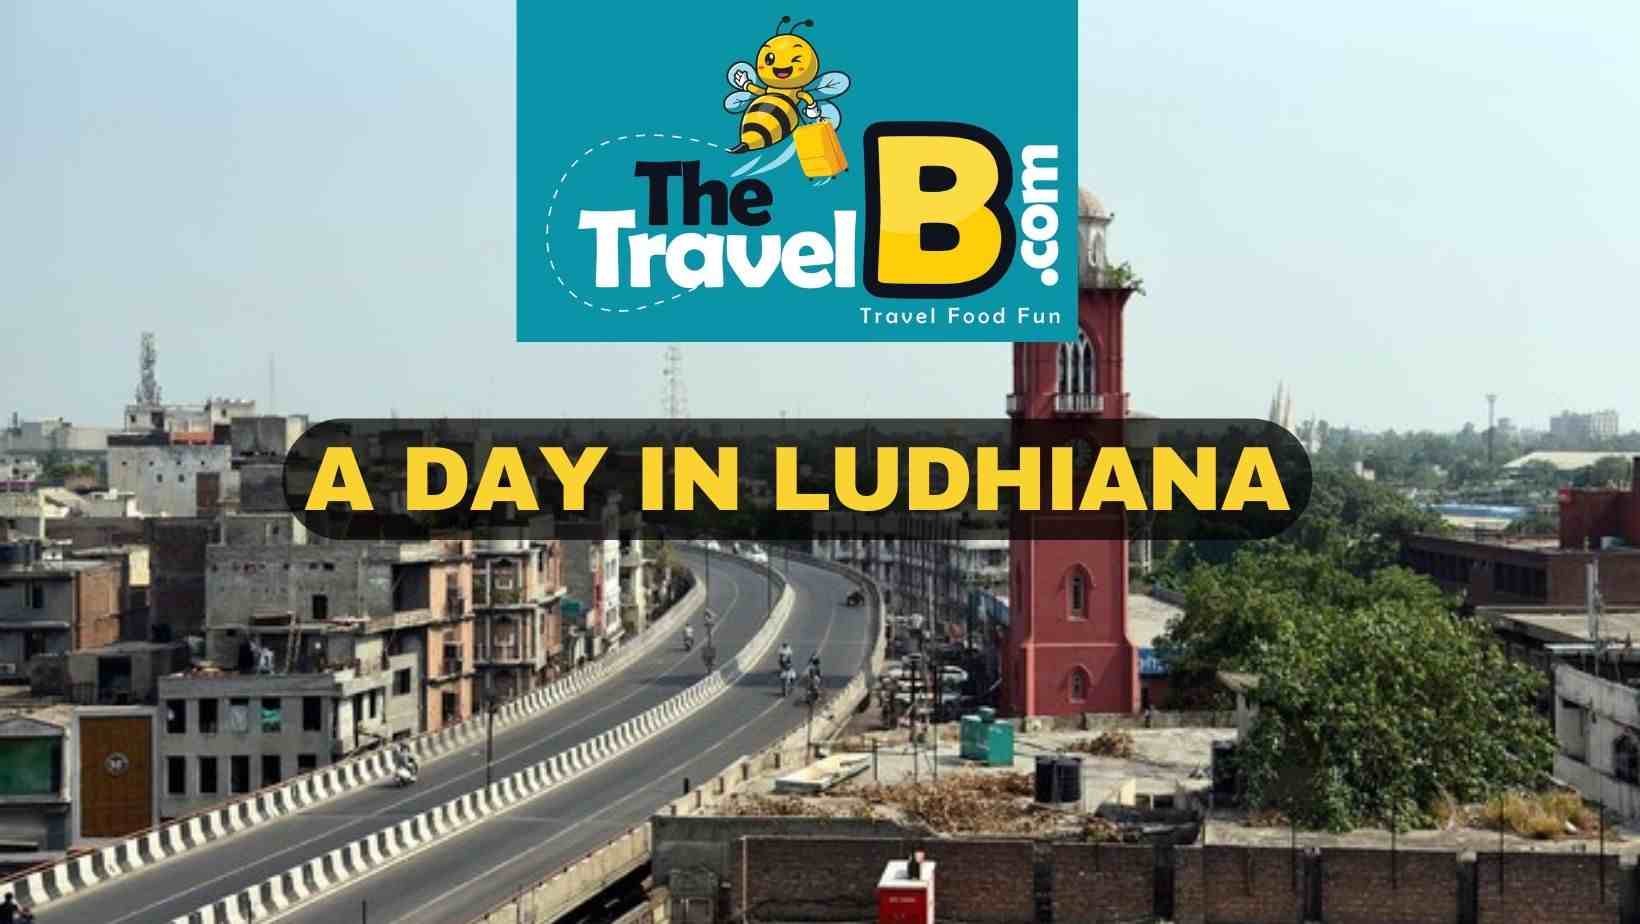 How Does a Day in Ludhiana Look Like